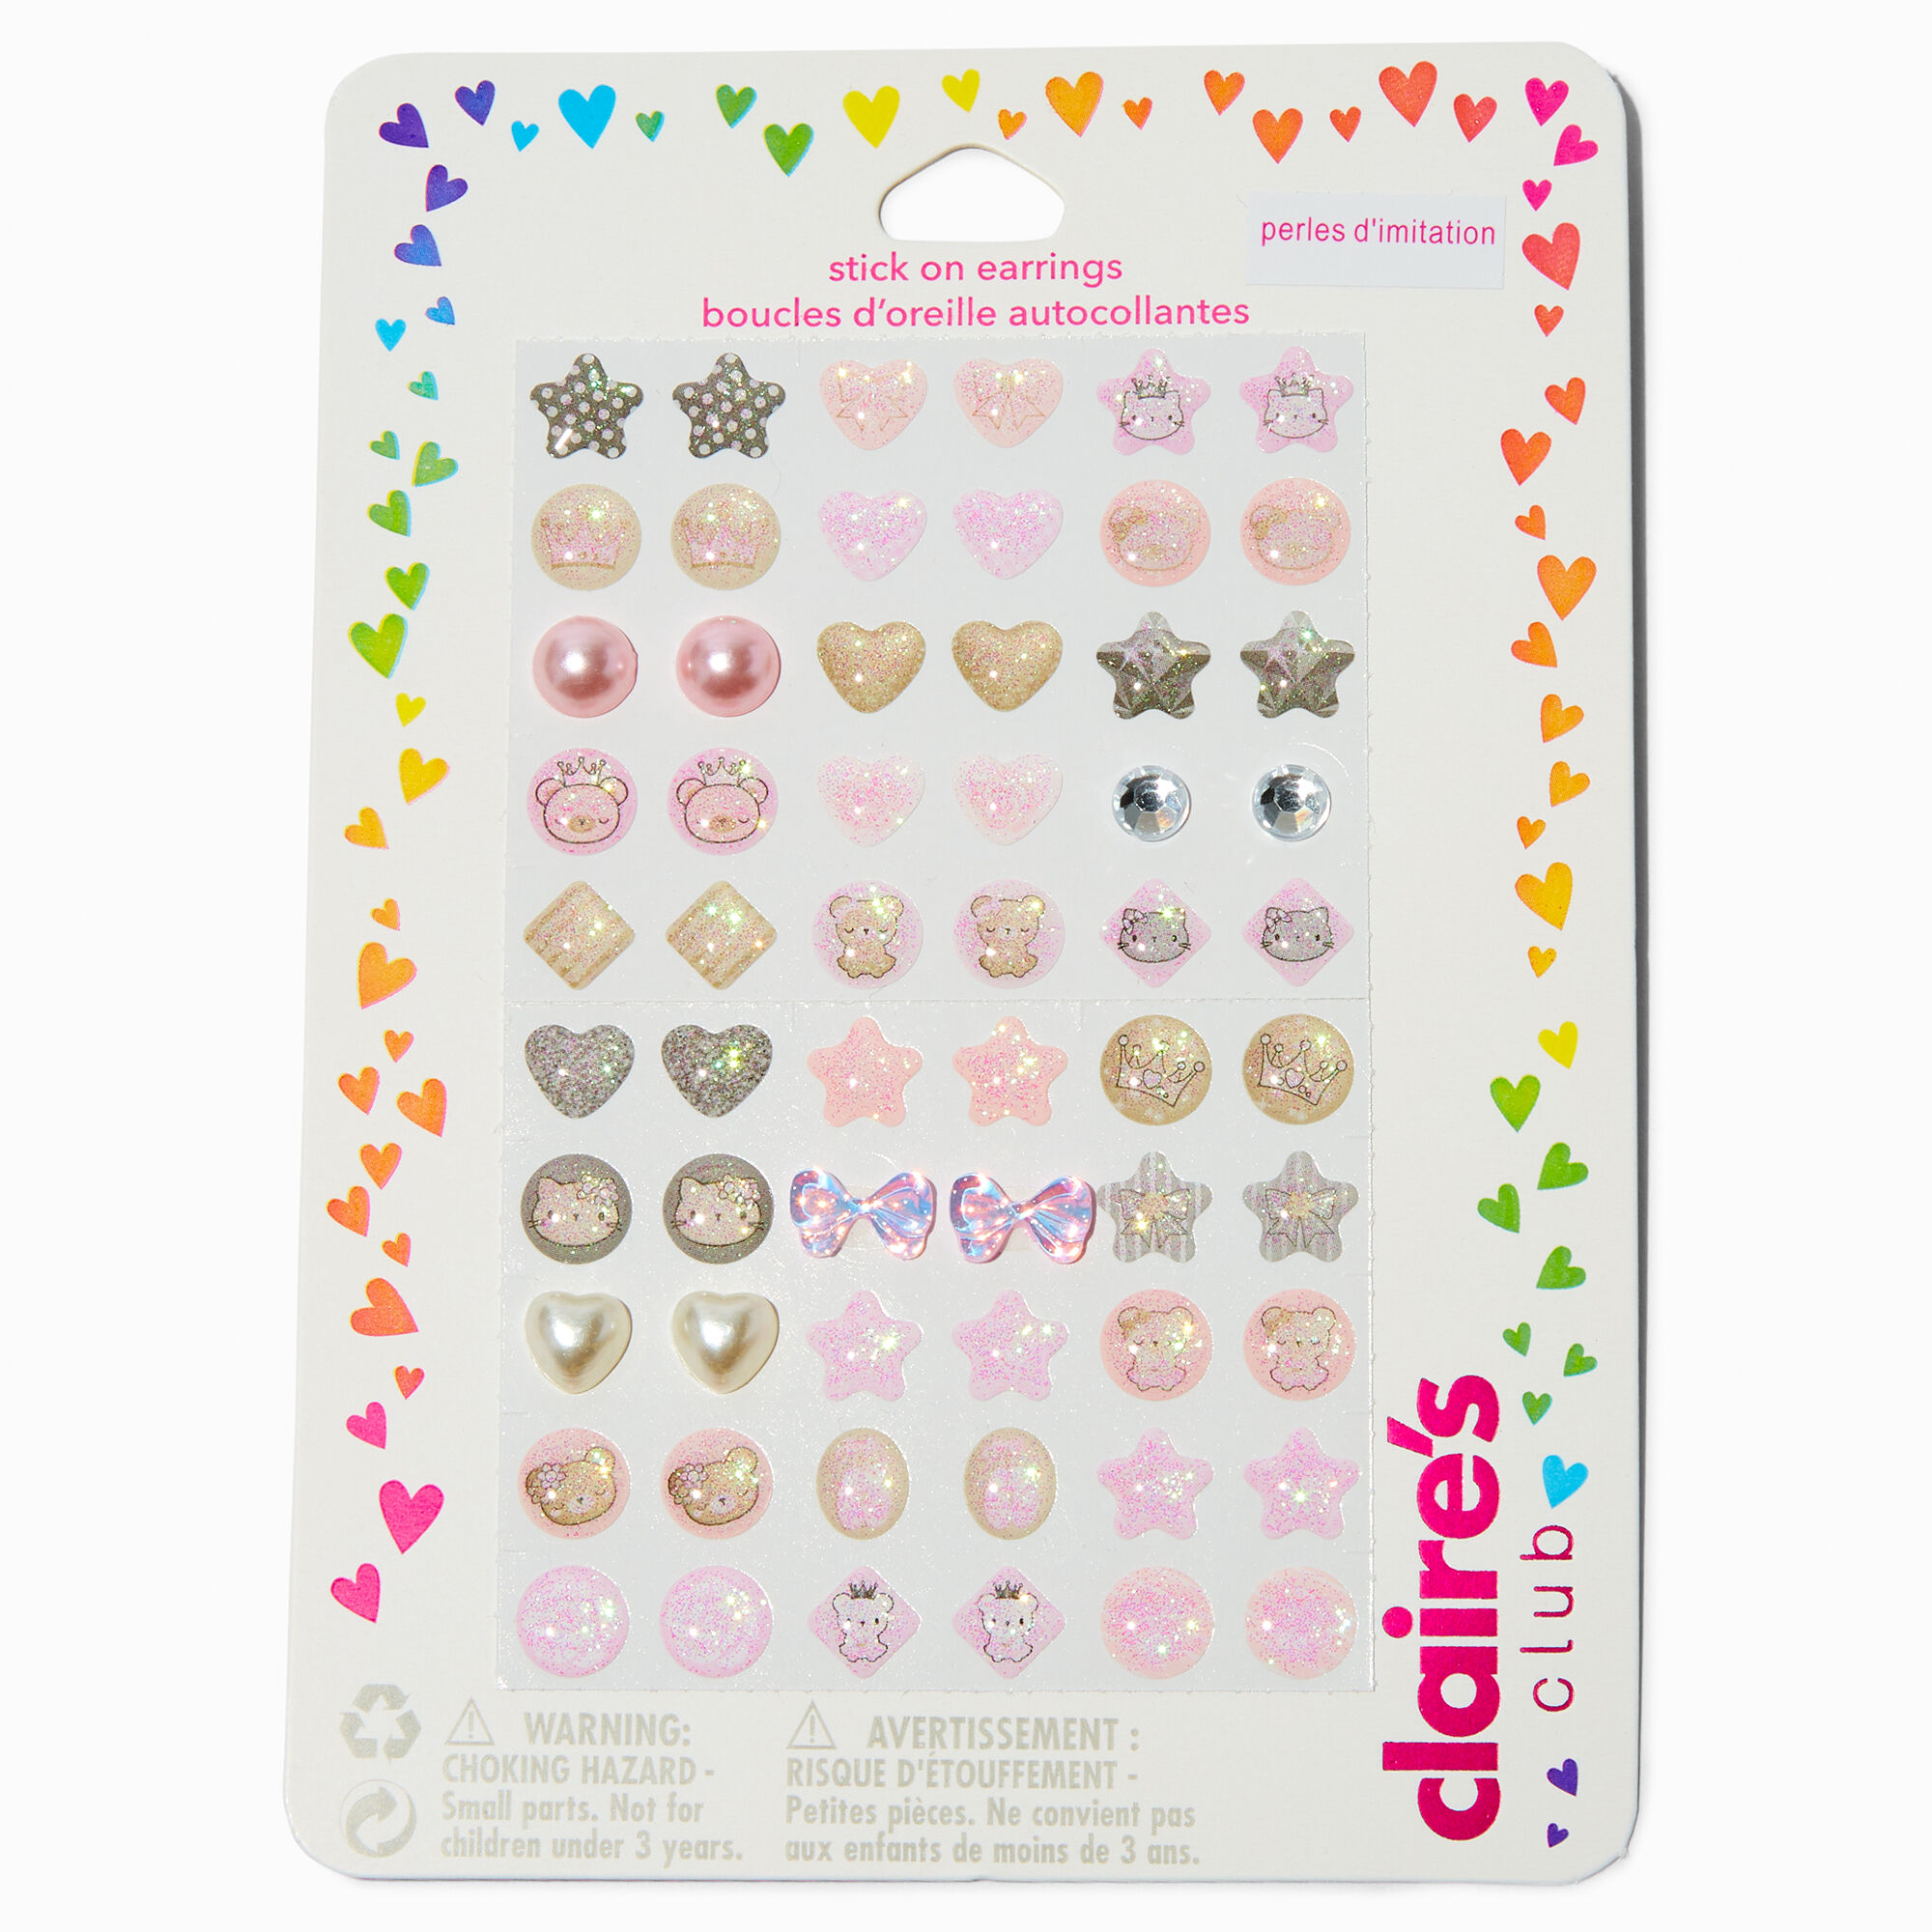 View Claires Club Cat Stick On Earrings 30 Pack Pink information